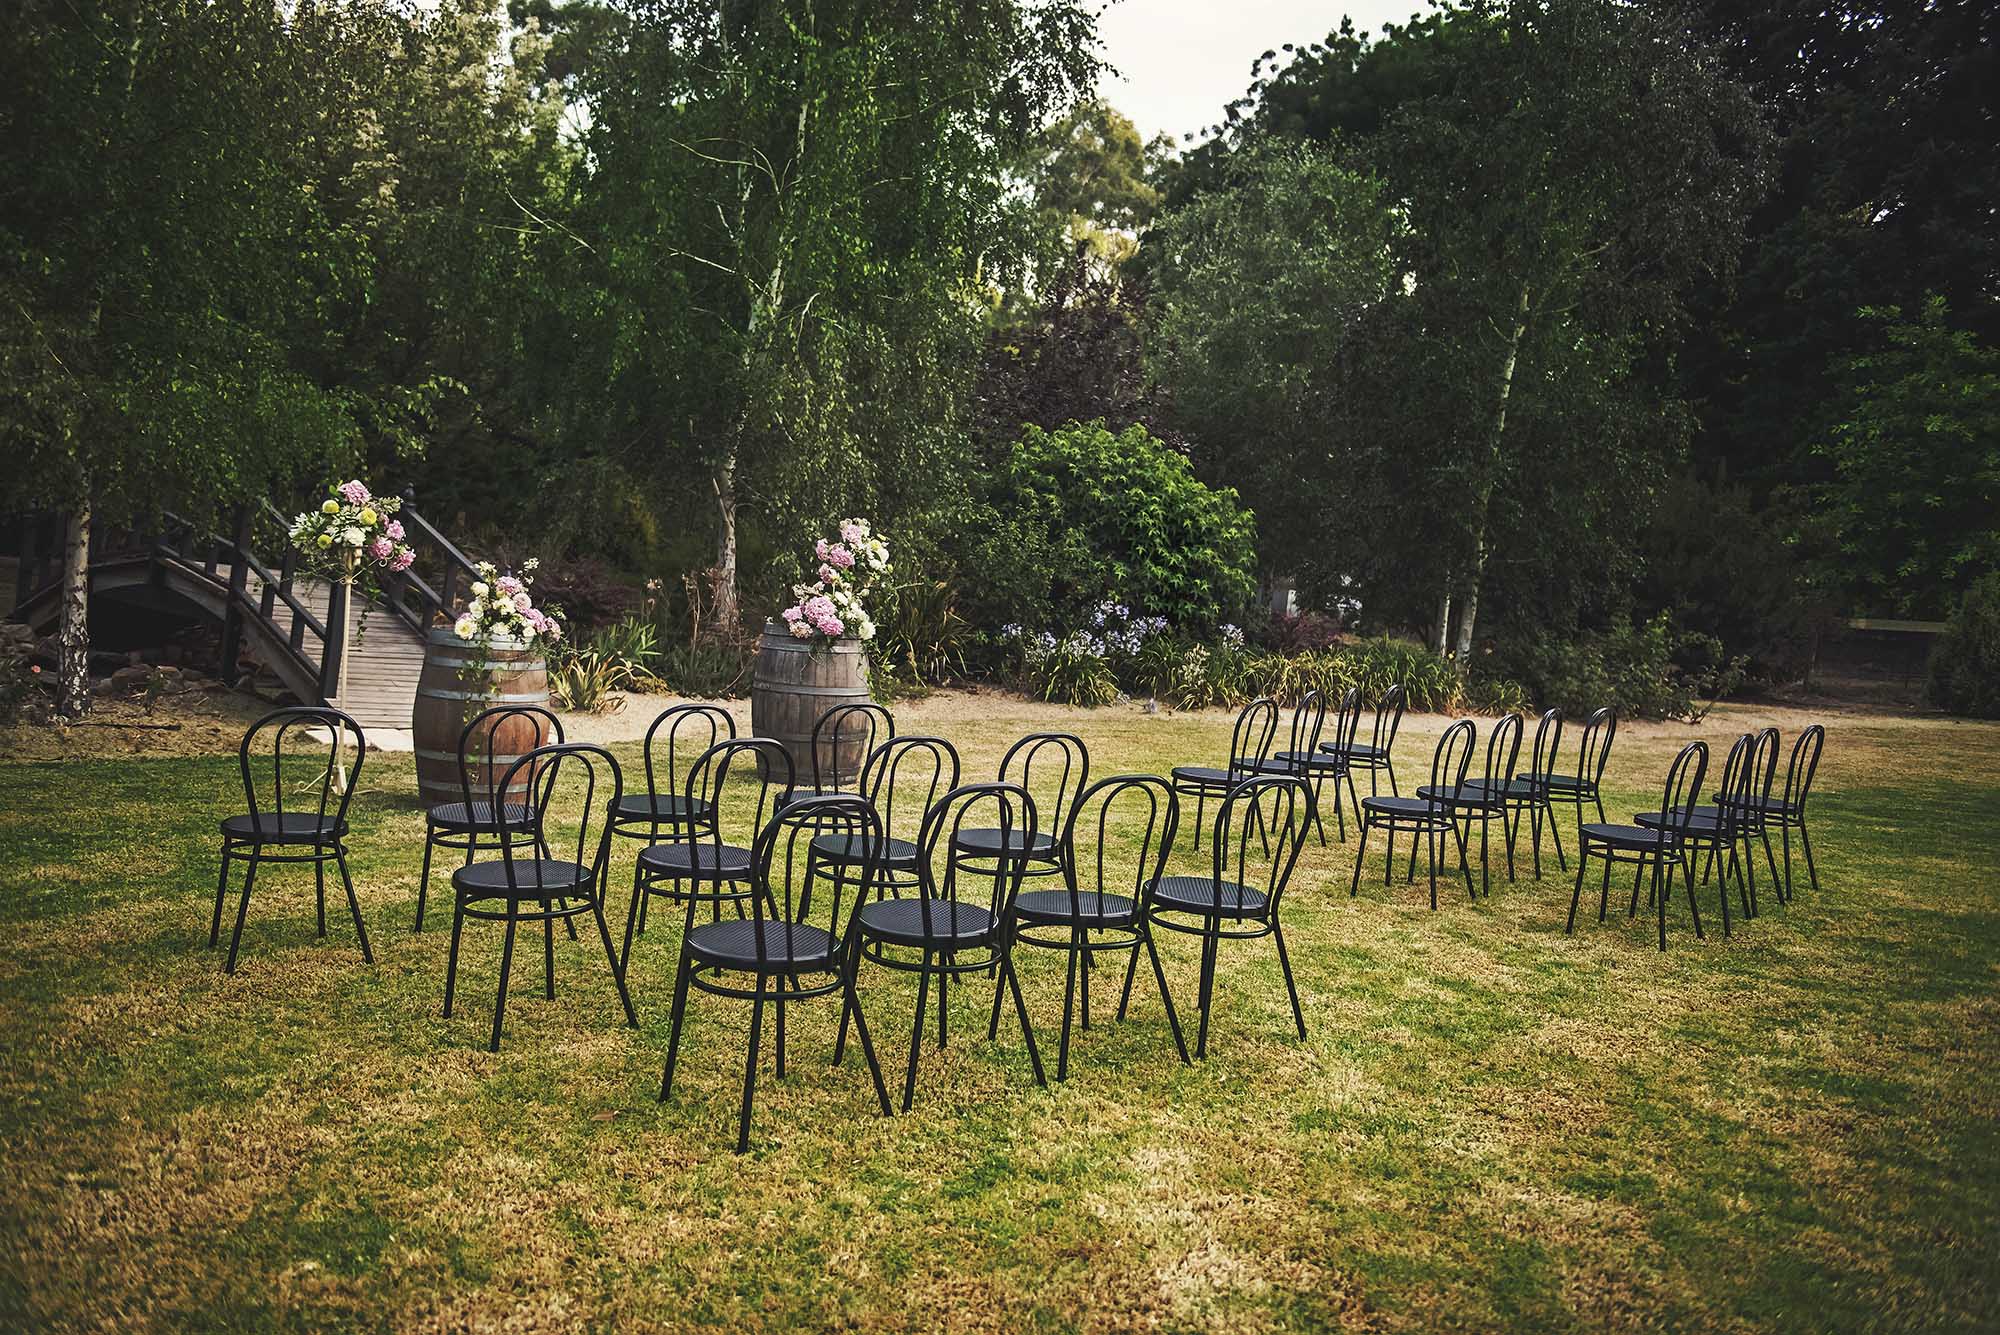 One of the first bespoke Adelaide Hills wedding venues, Hazelmere Homestead is a private estate with 3 acres of stunning gardens which surround their magnificent heritage homestead, pavilion events space and boutique accommodation.